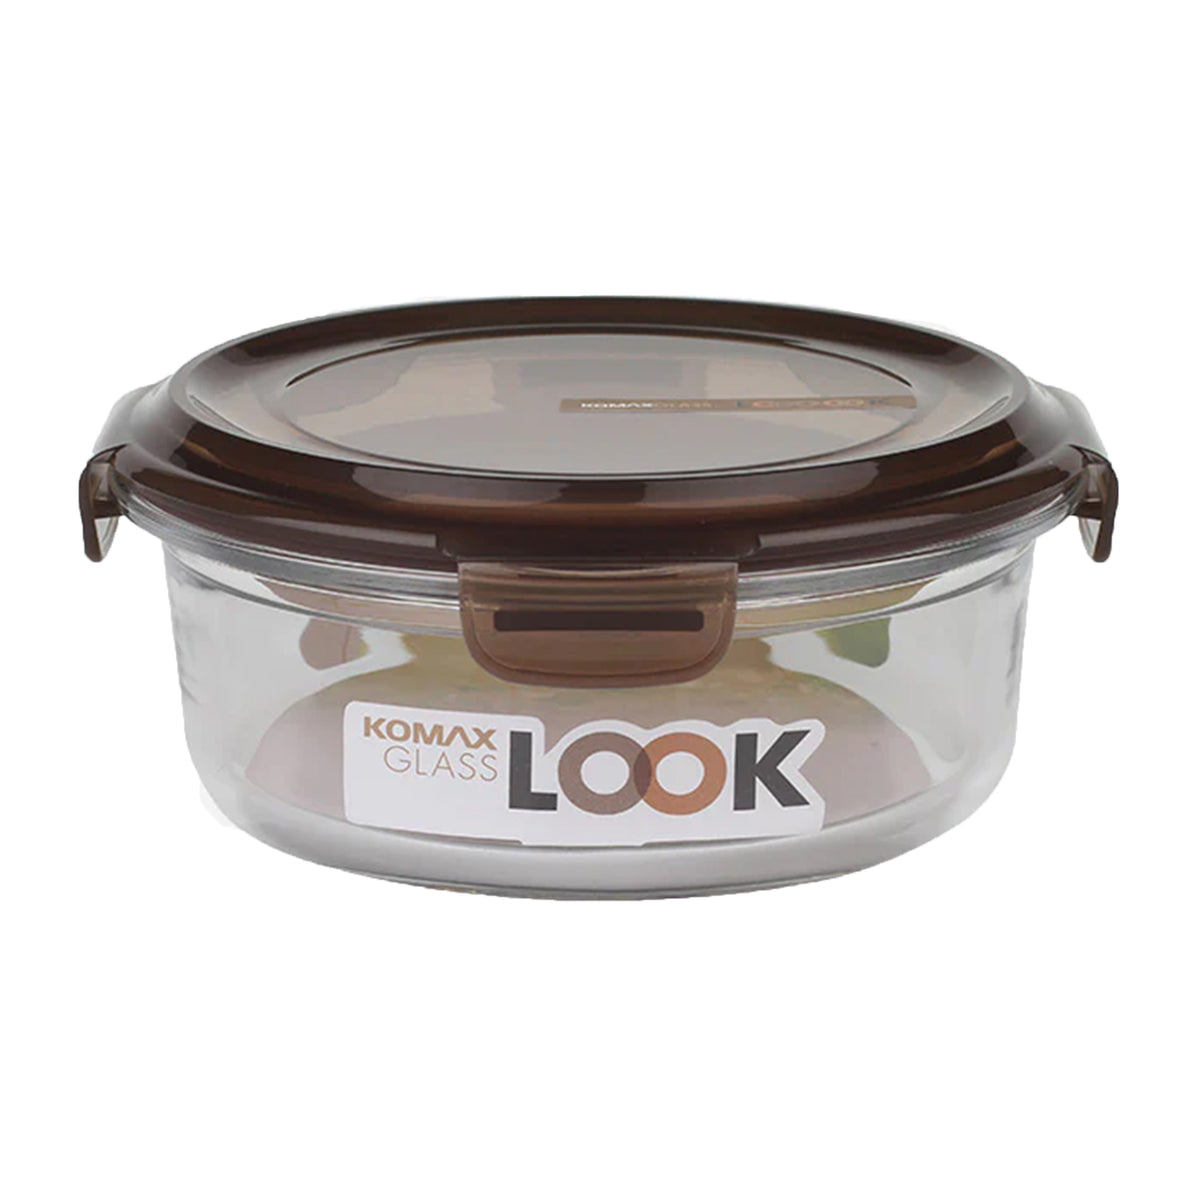 Sealable round glass food storage container